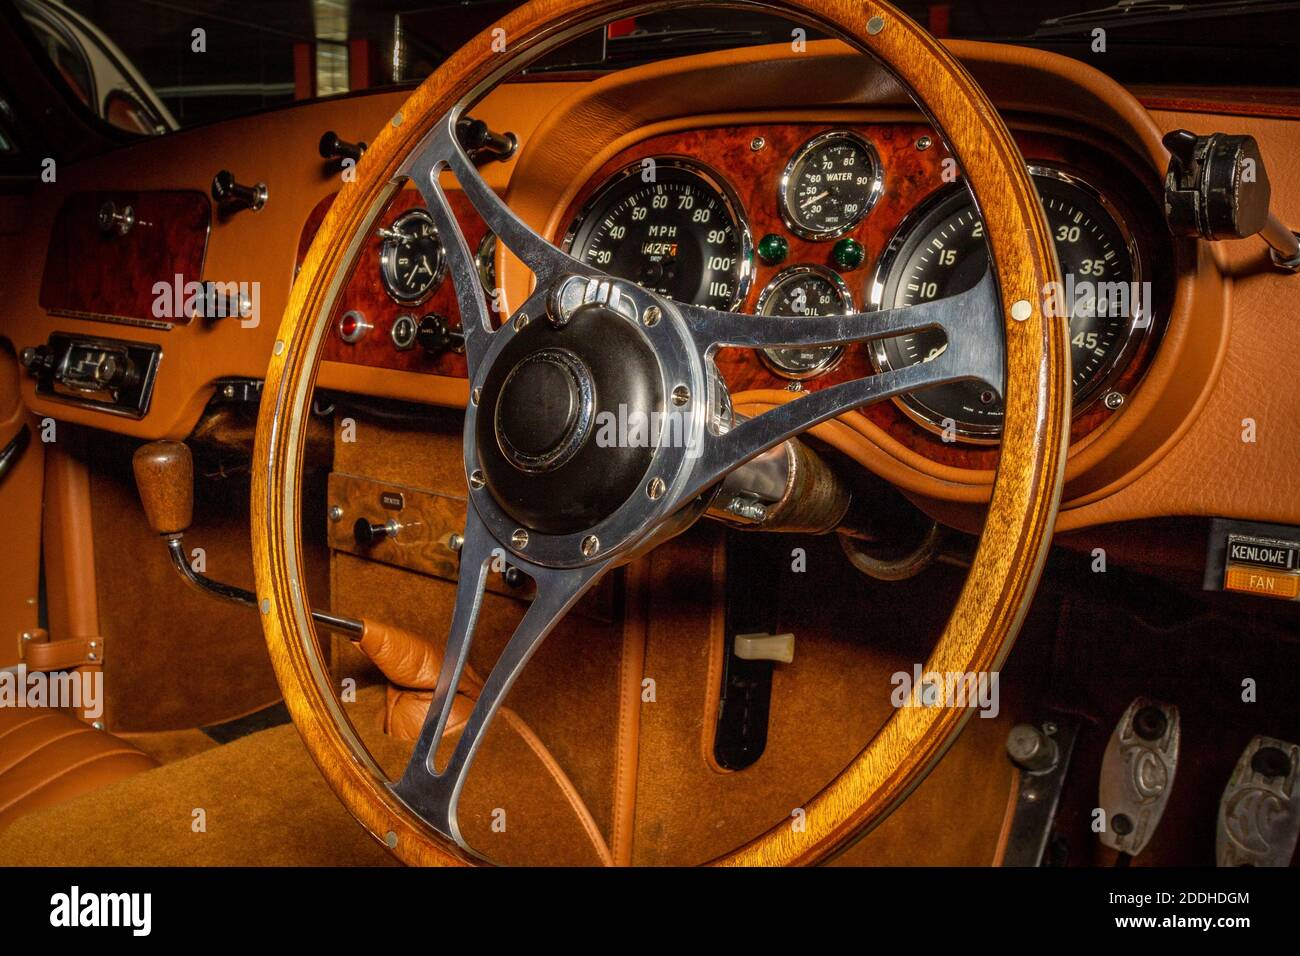 1960 AC Aceca, interior view of steering wheel and dashboard, Studio 434 car collection Stock Photo